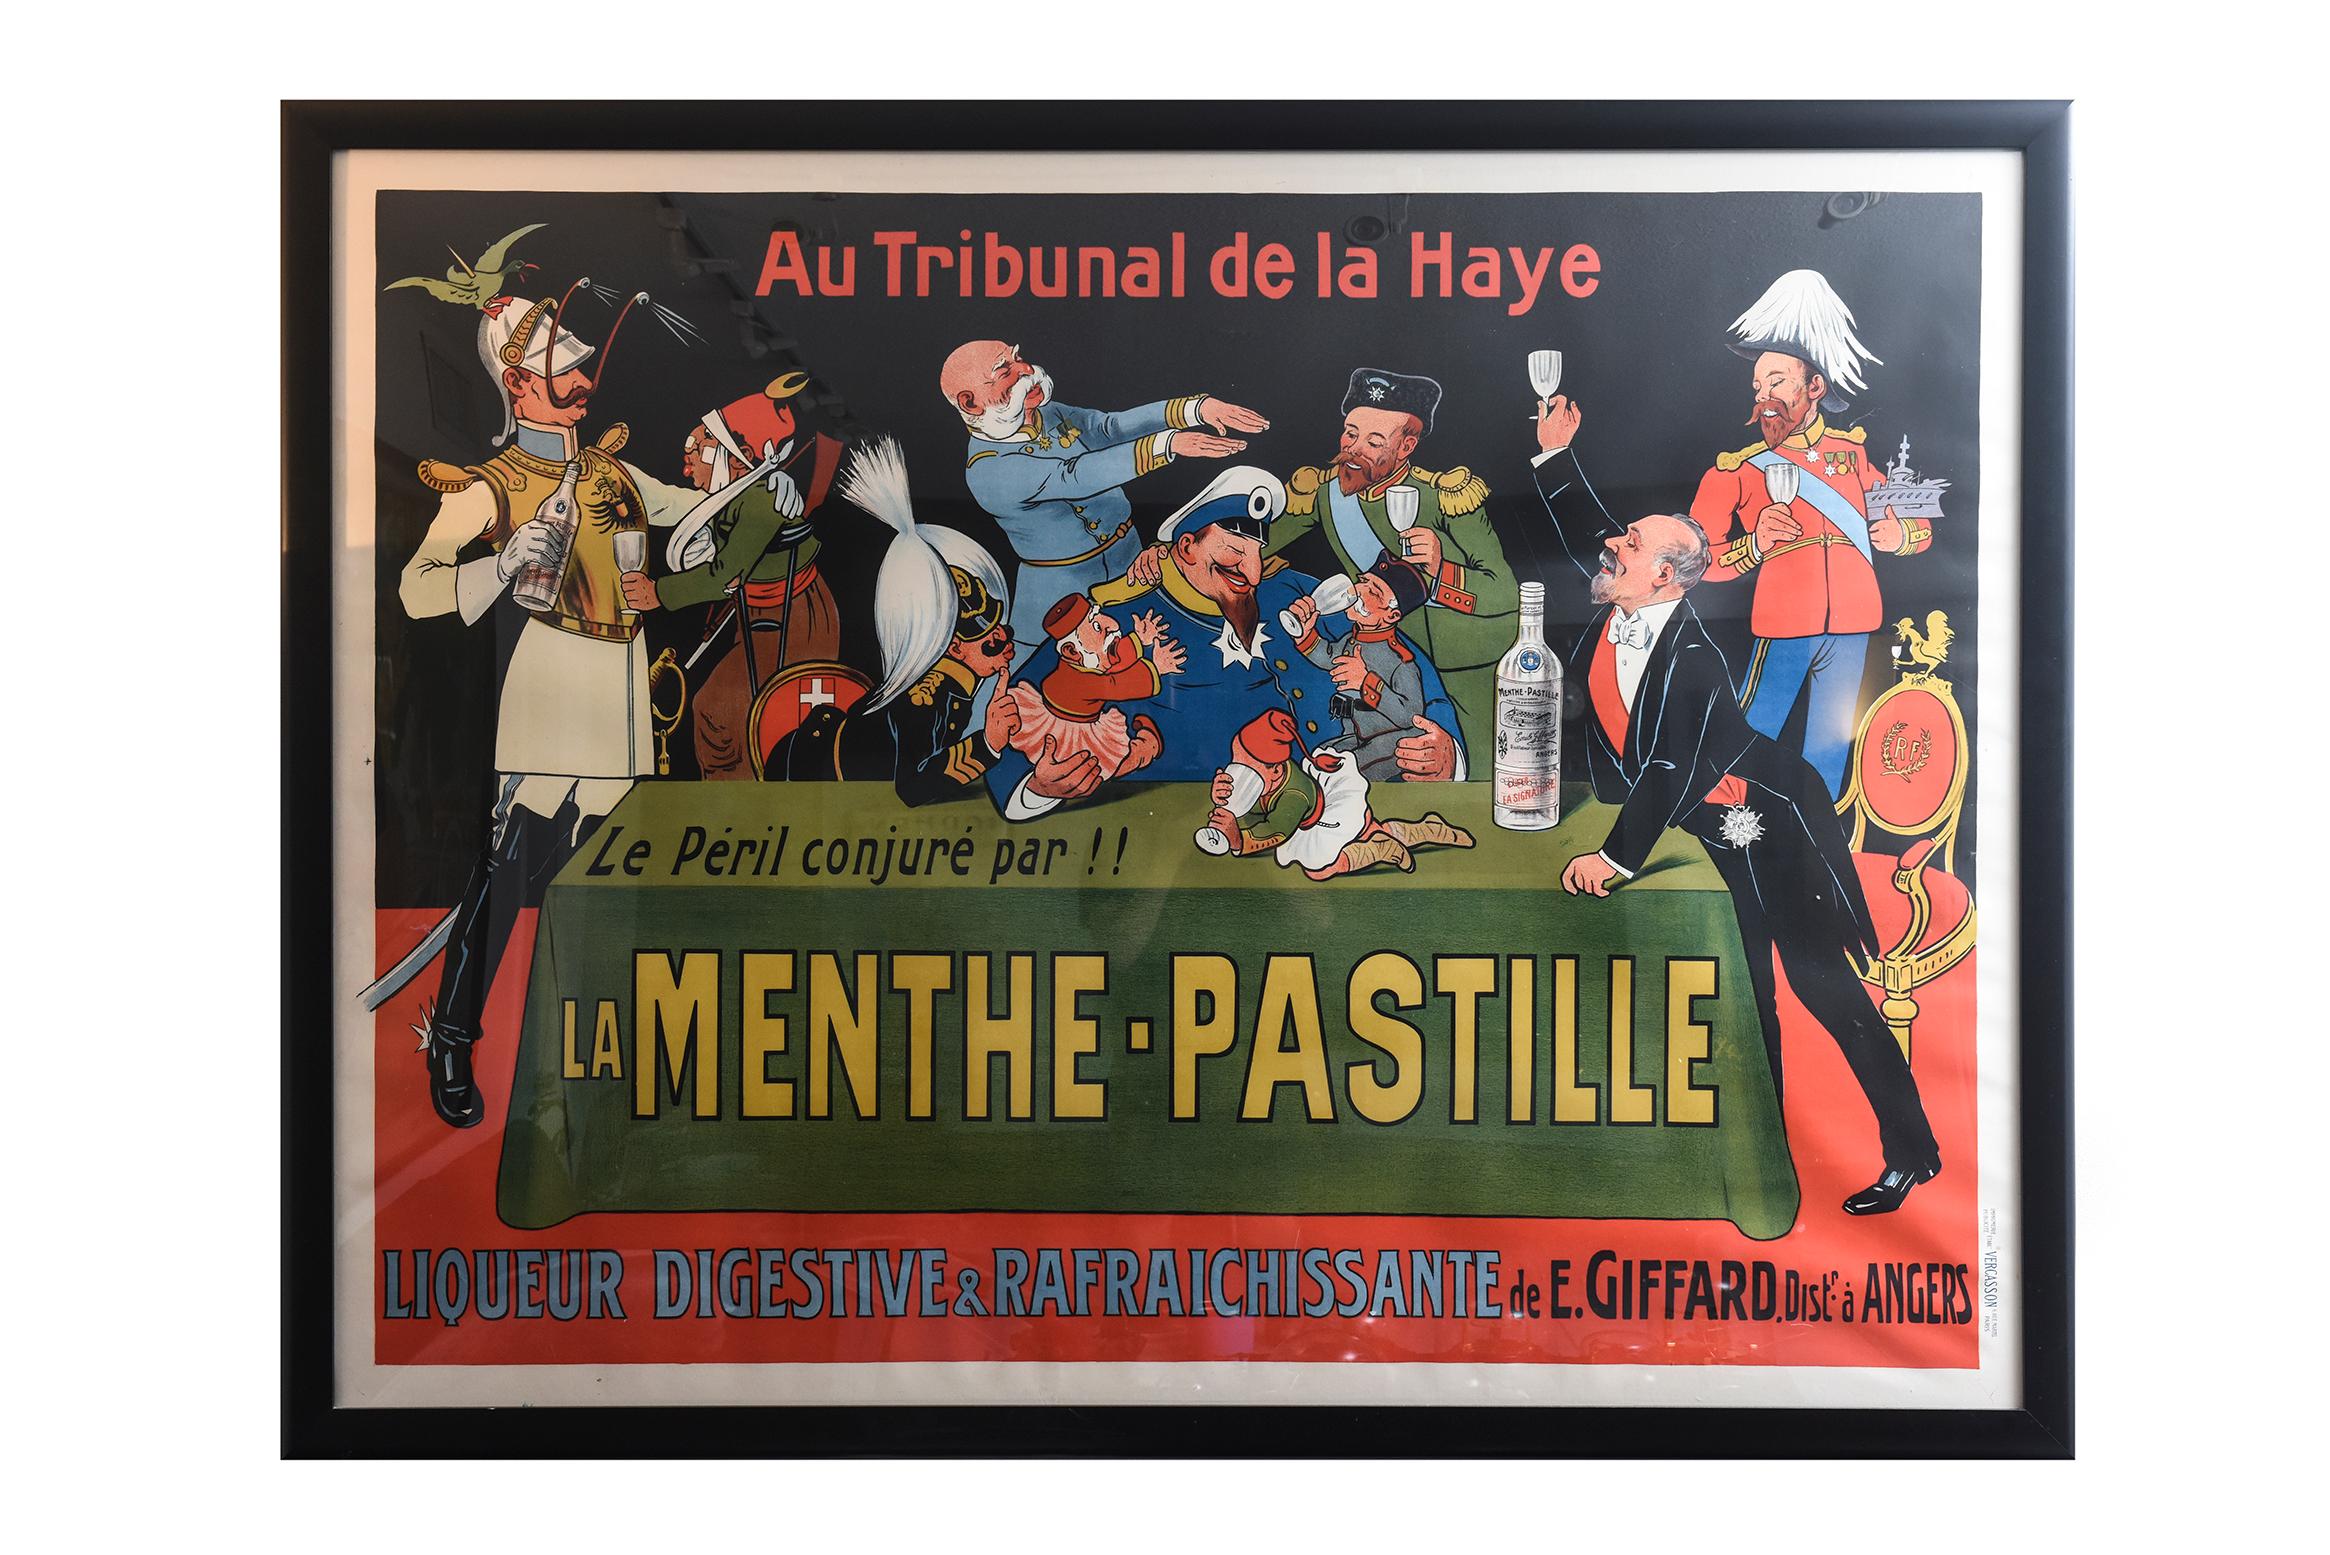 EUGENE OGE (French. 1861-1936)

This poster is an advertisement for the liquor brand for Giffard Distilleries in Angers, (Loire Valley) France. The mint flavored liquor, La Menthe- Pastille, was first produced in 1885 by pharmacist, Emile Giffard